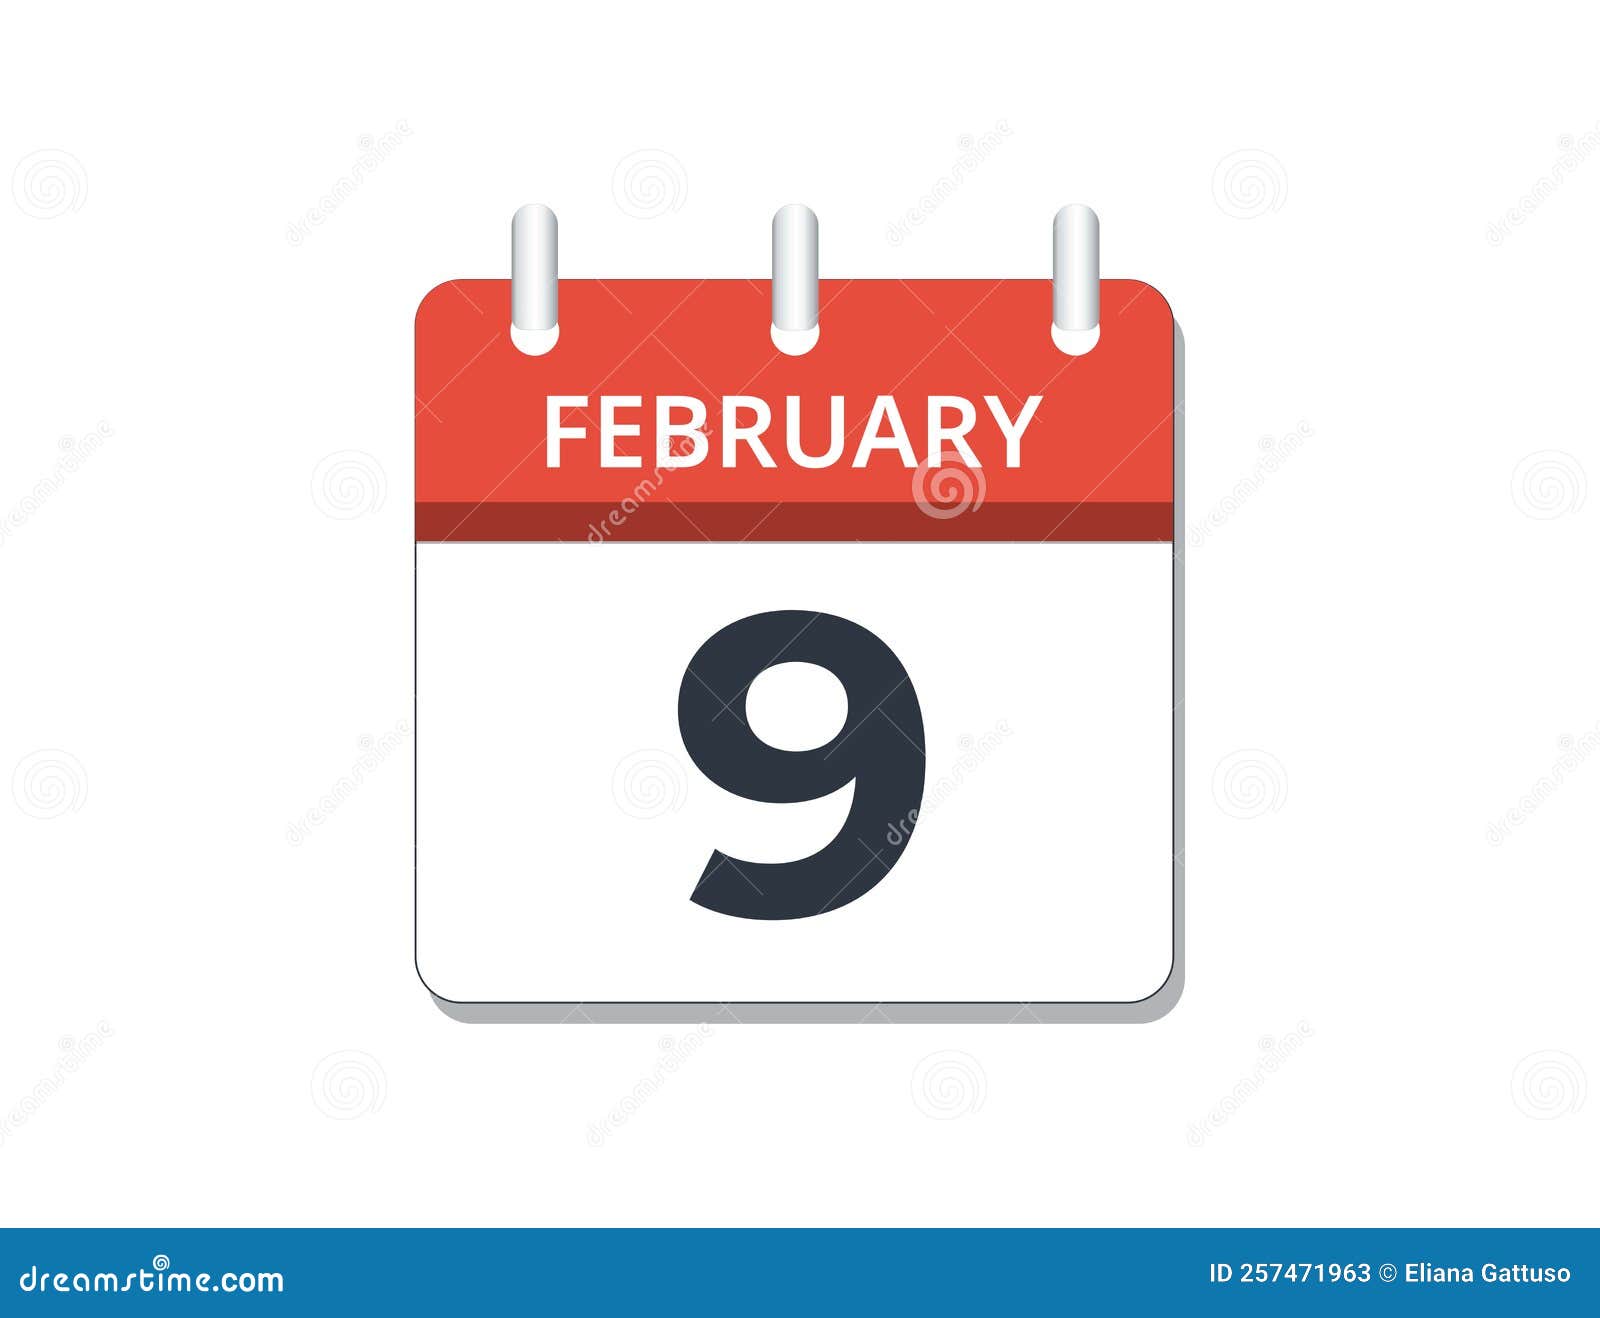 February, 9th Calendar Icon Vector, Concept of Schedule, Business and